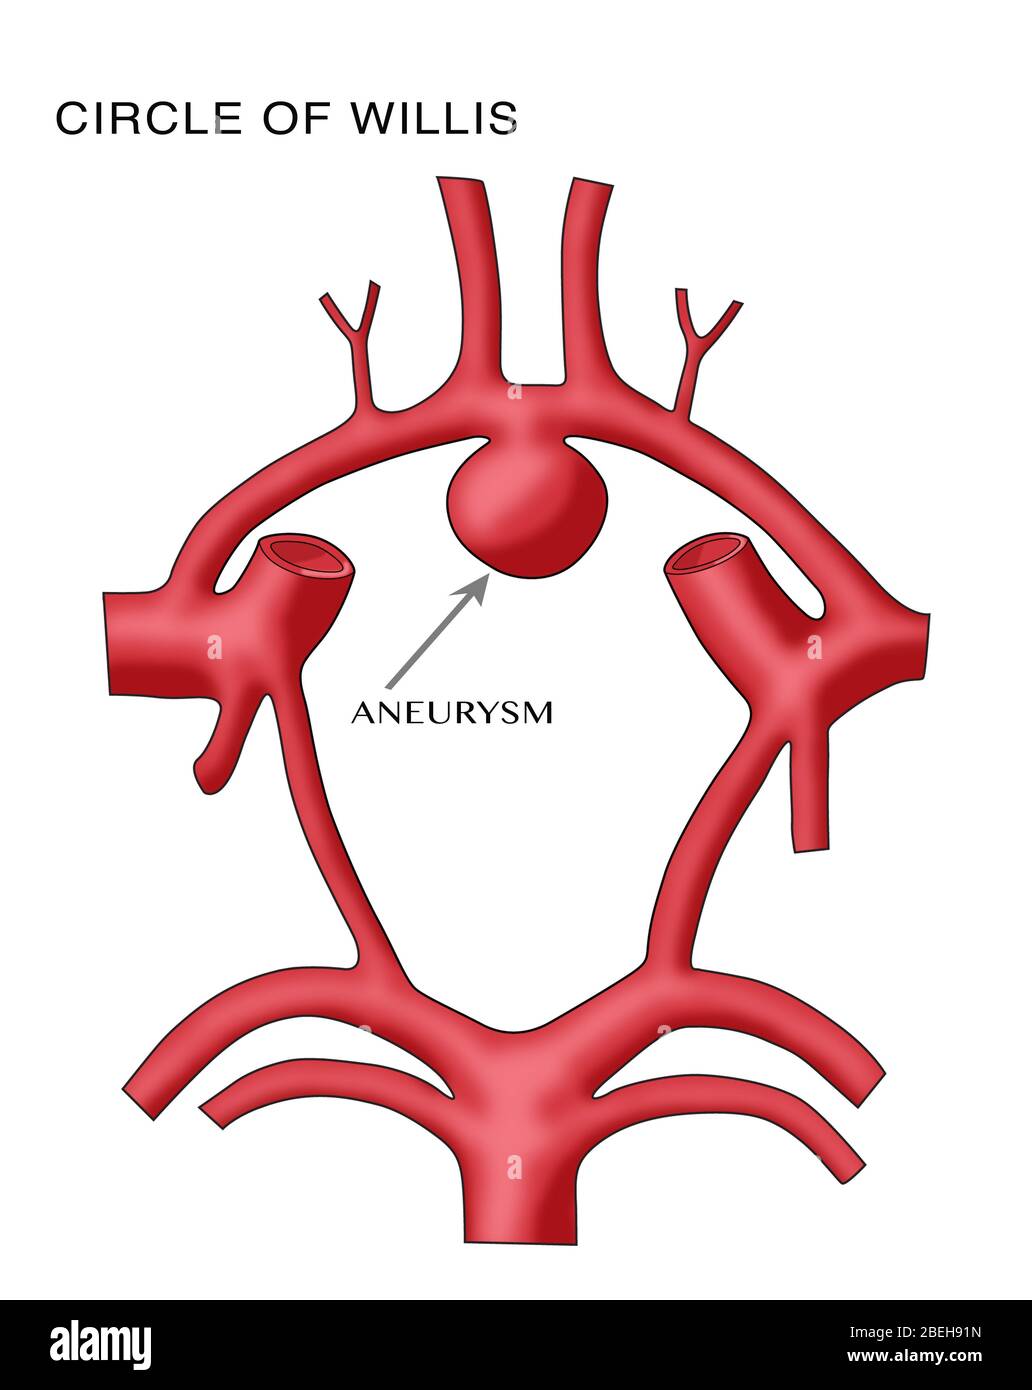 Aneurysm in the Circle of Willis Stock Photo